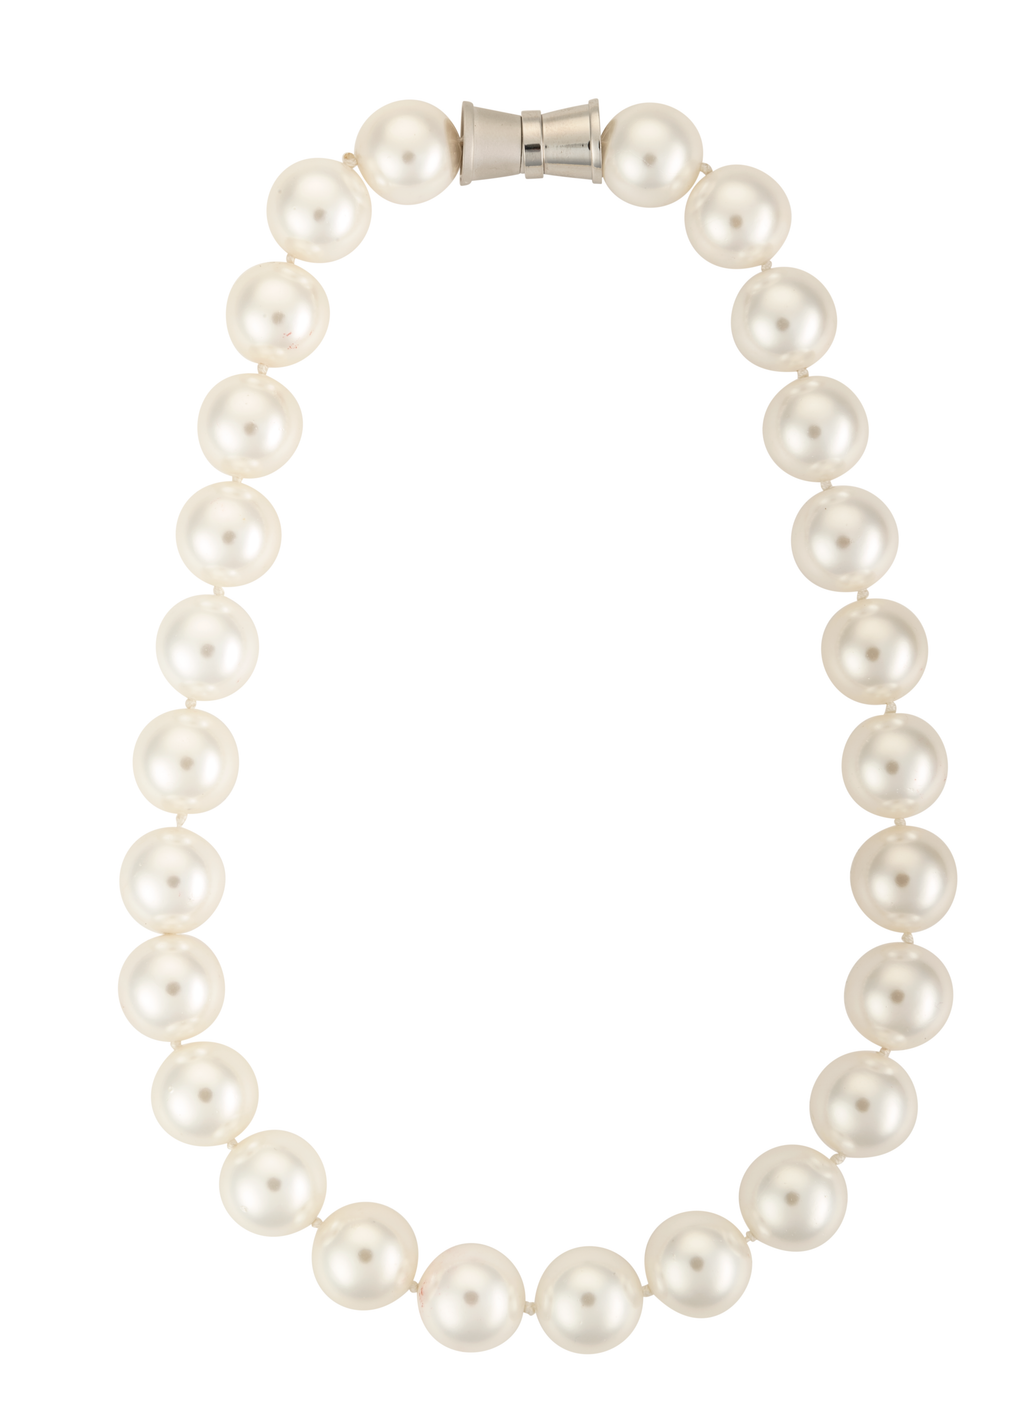 Large mother of pearl strand necklace